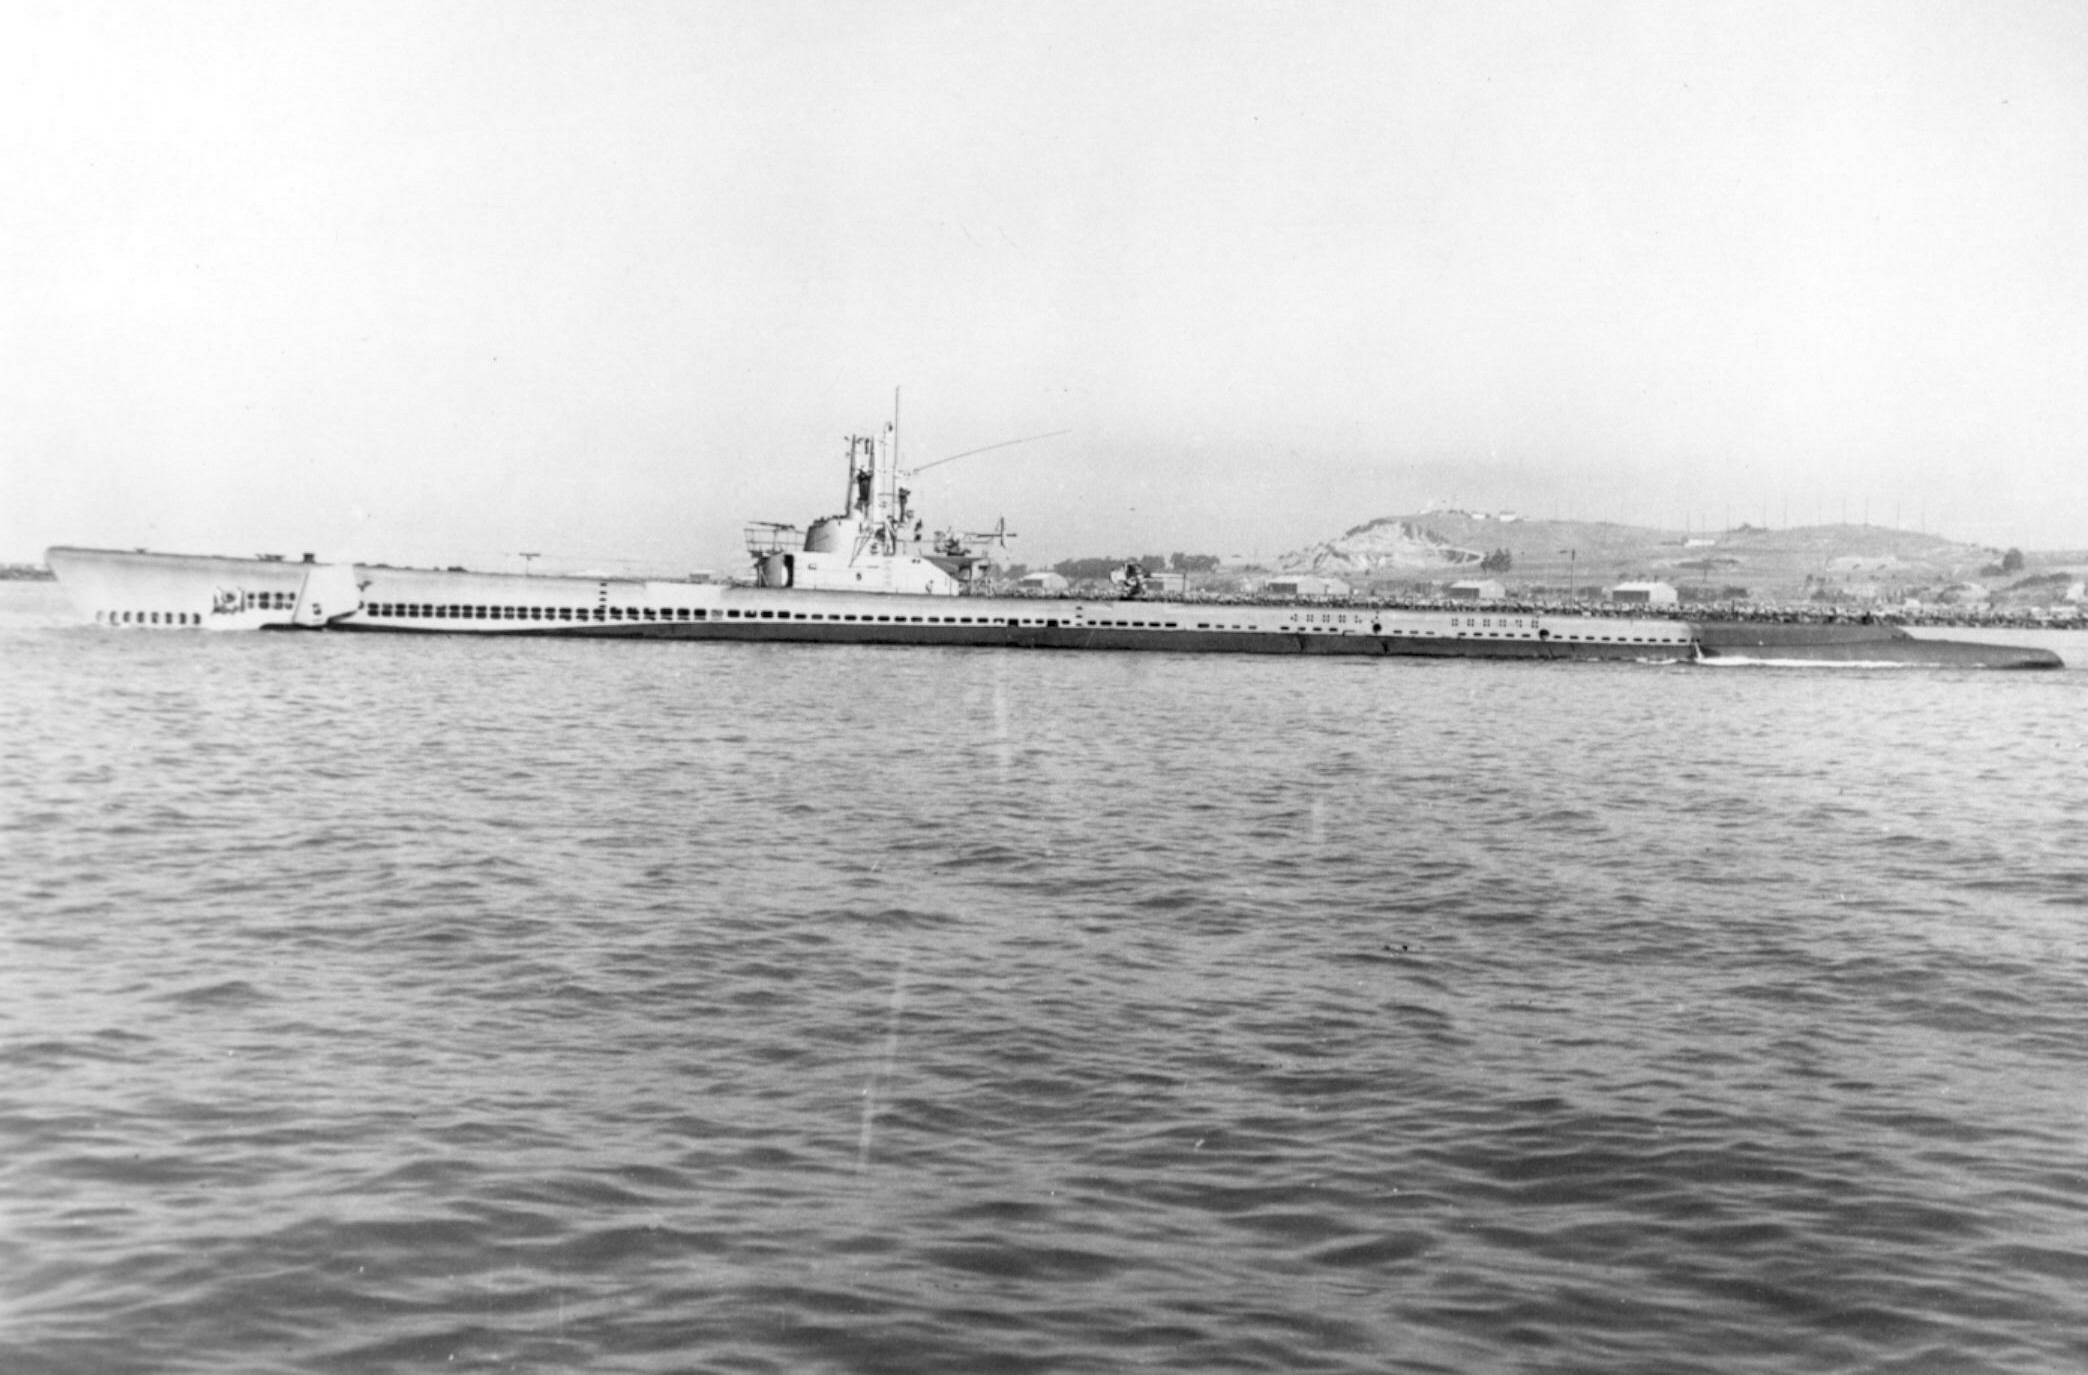 Port side view of USS Spot, off Mare Island Naval Shipyard, Vallejo, California, United States, 22 Sep 1944